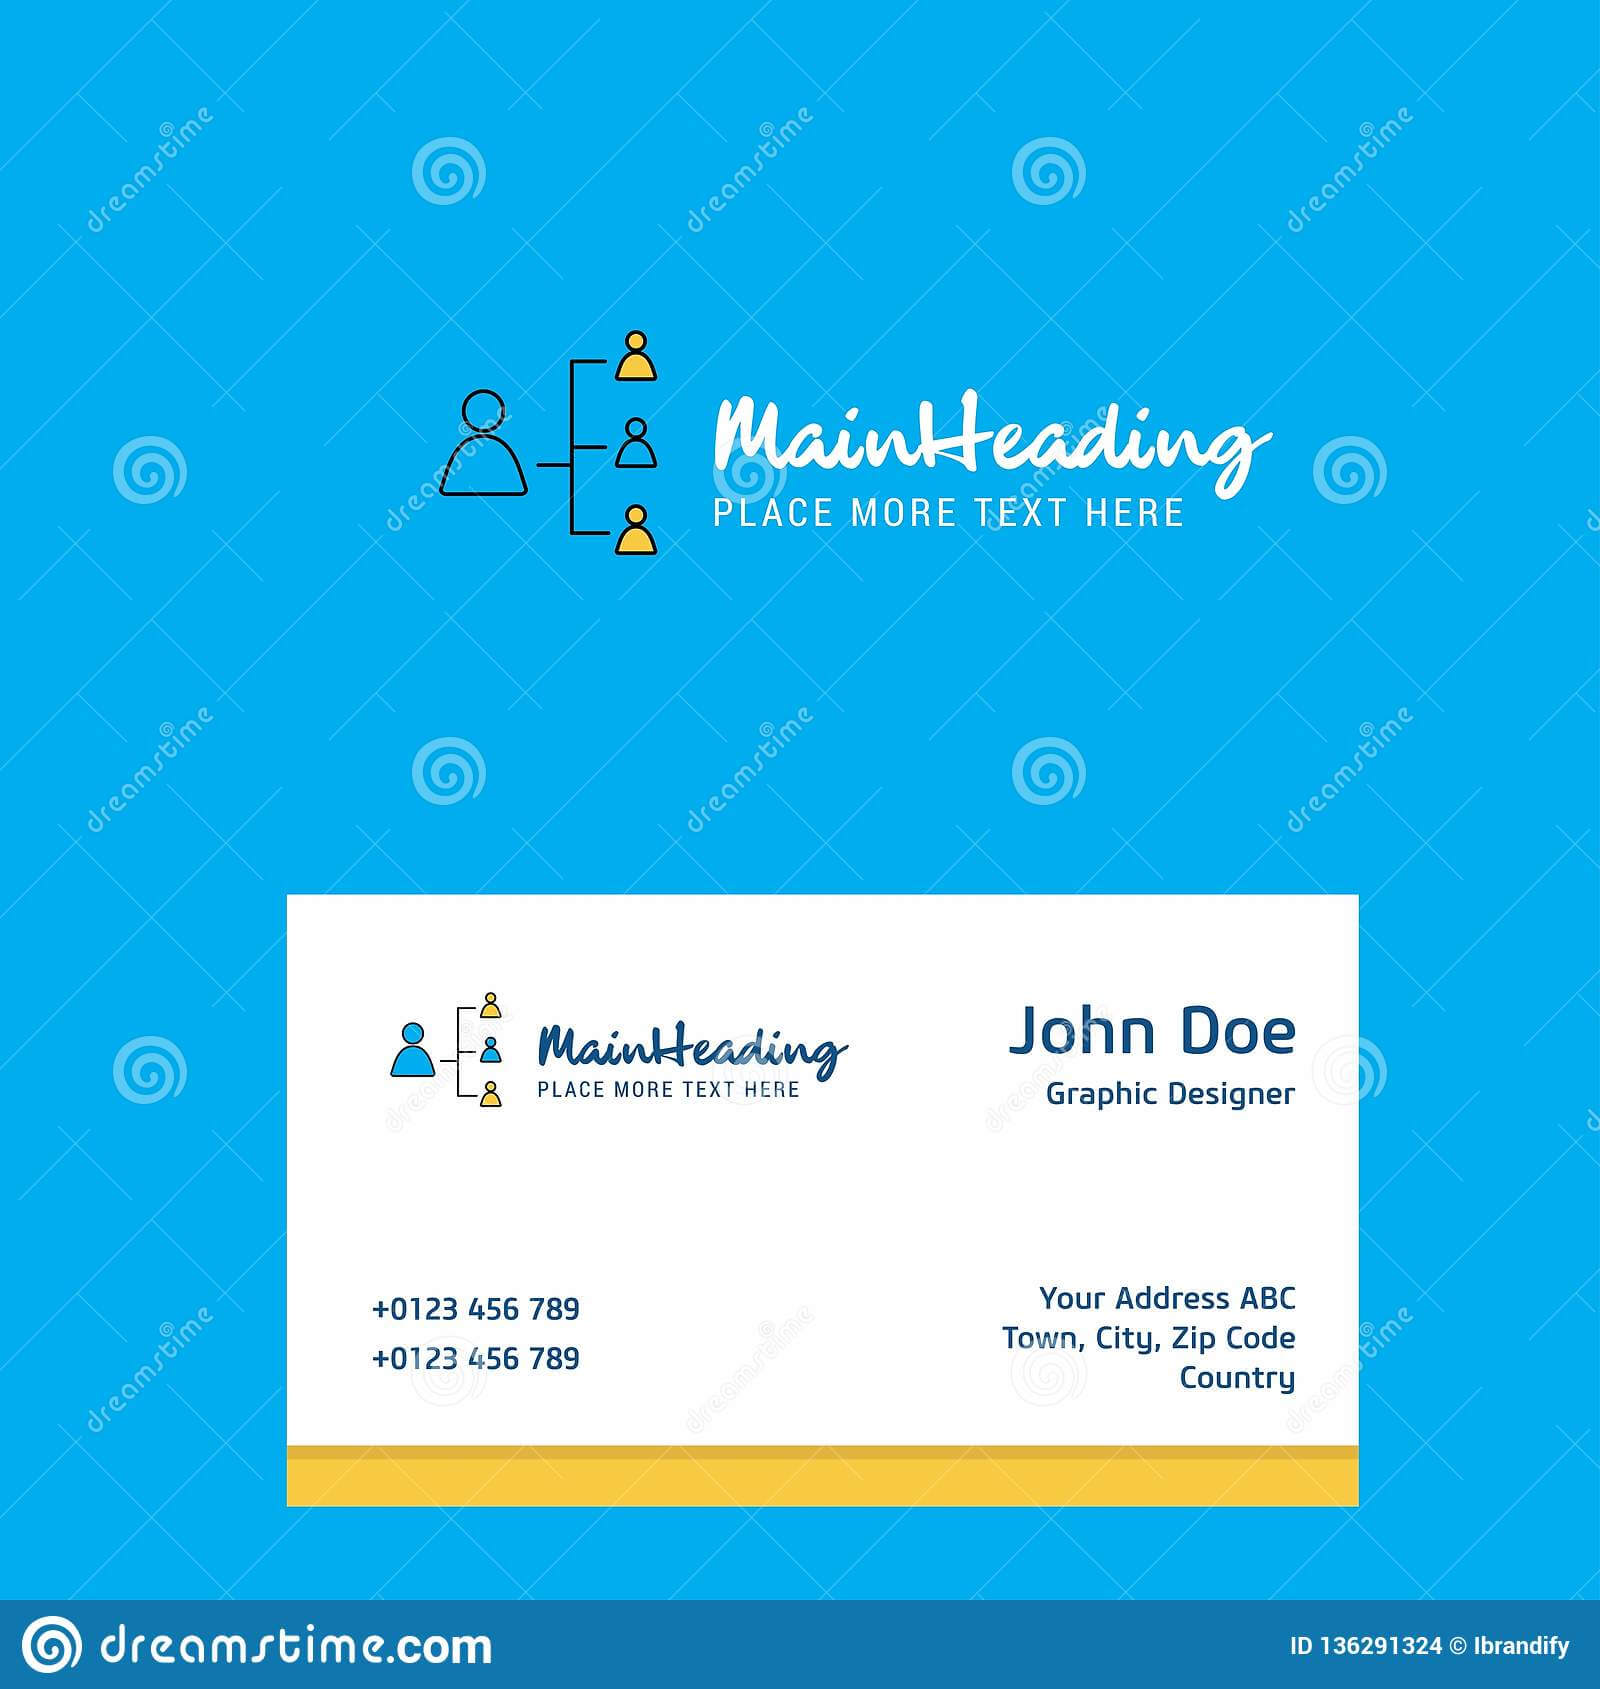 Networking Logo Design With Business Card Template. Elegant With Regard To Networking Card Template